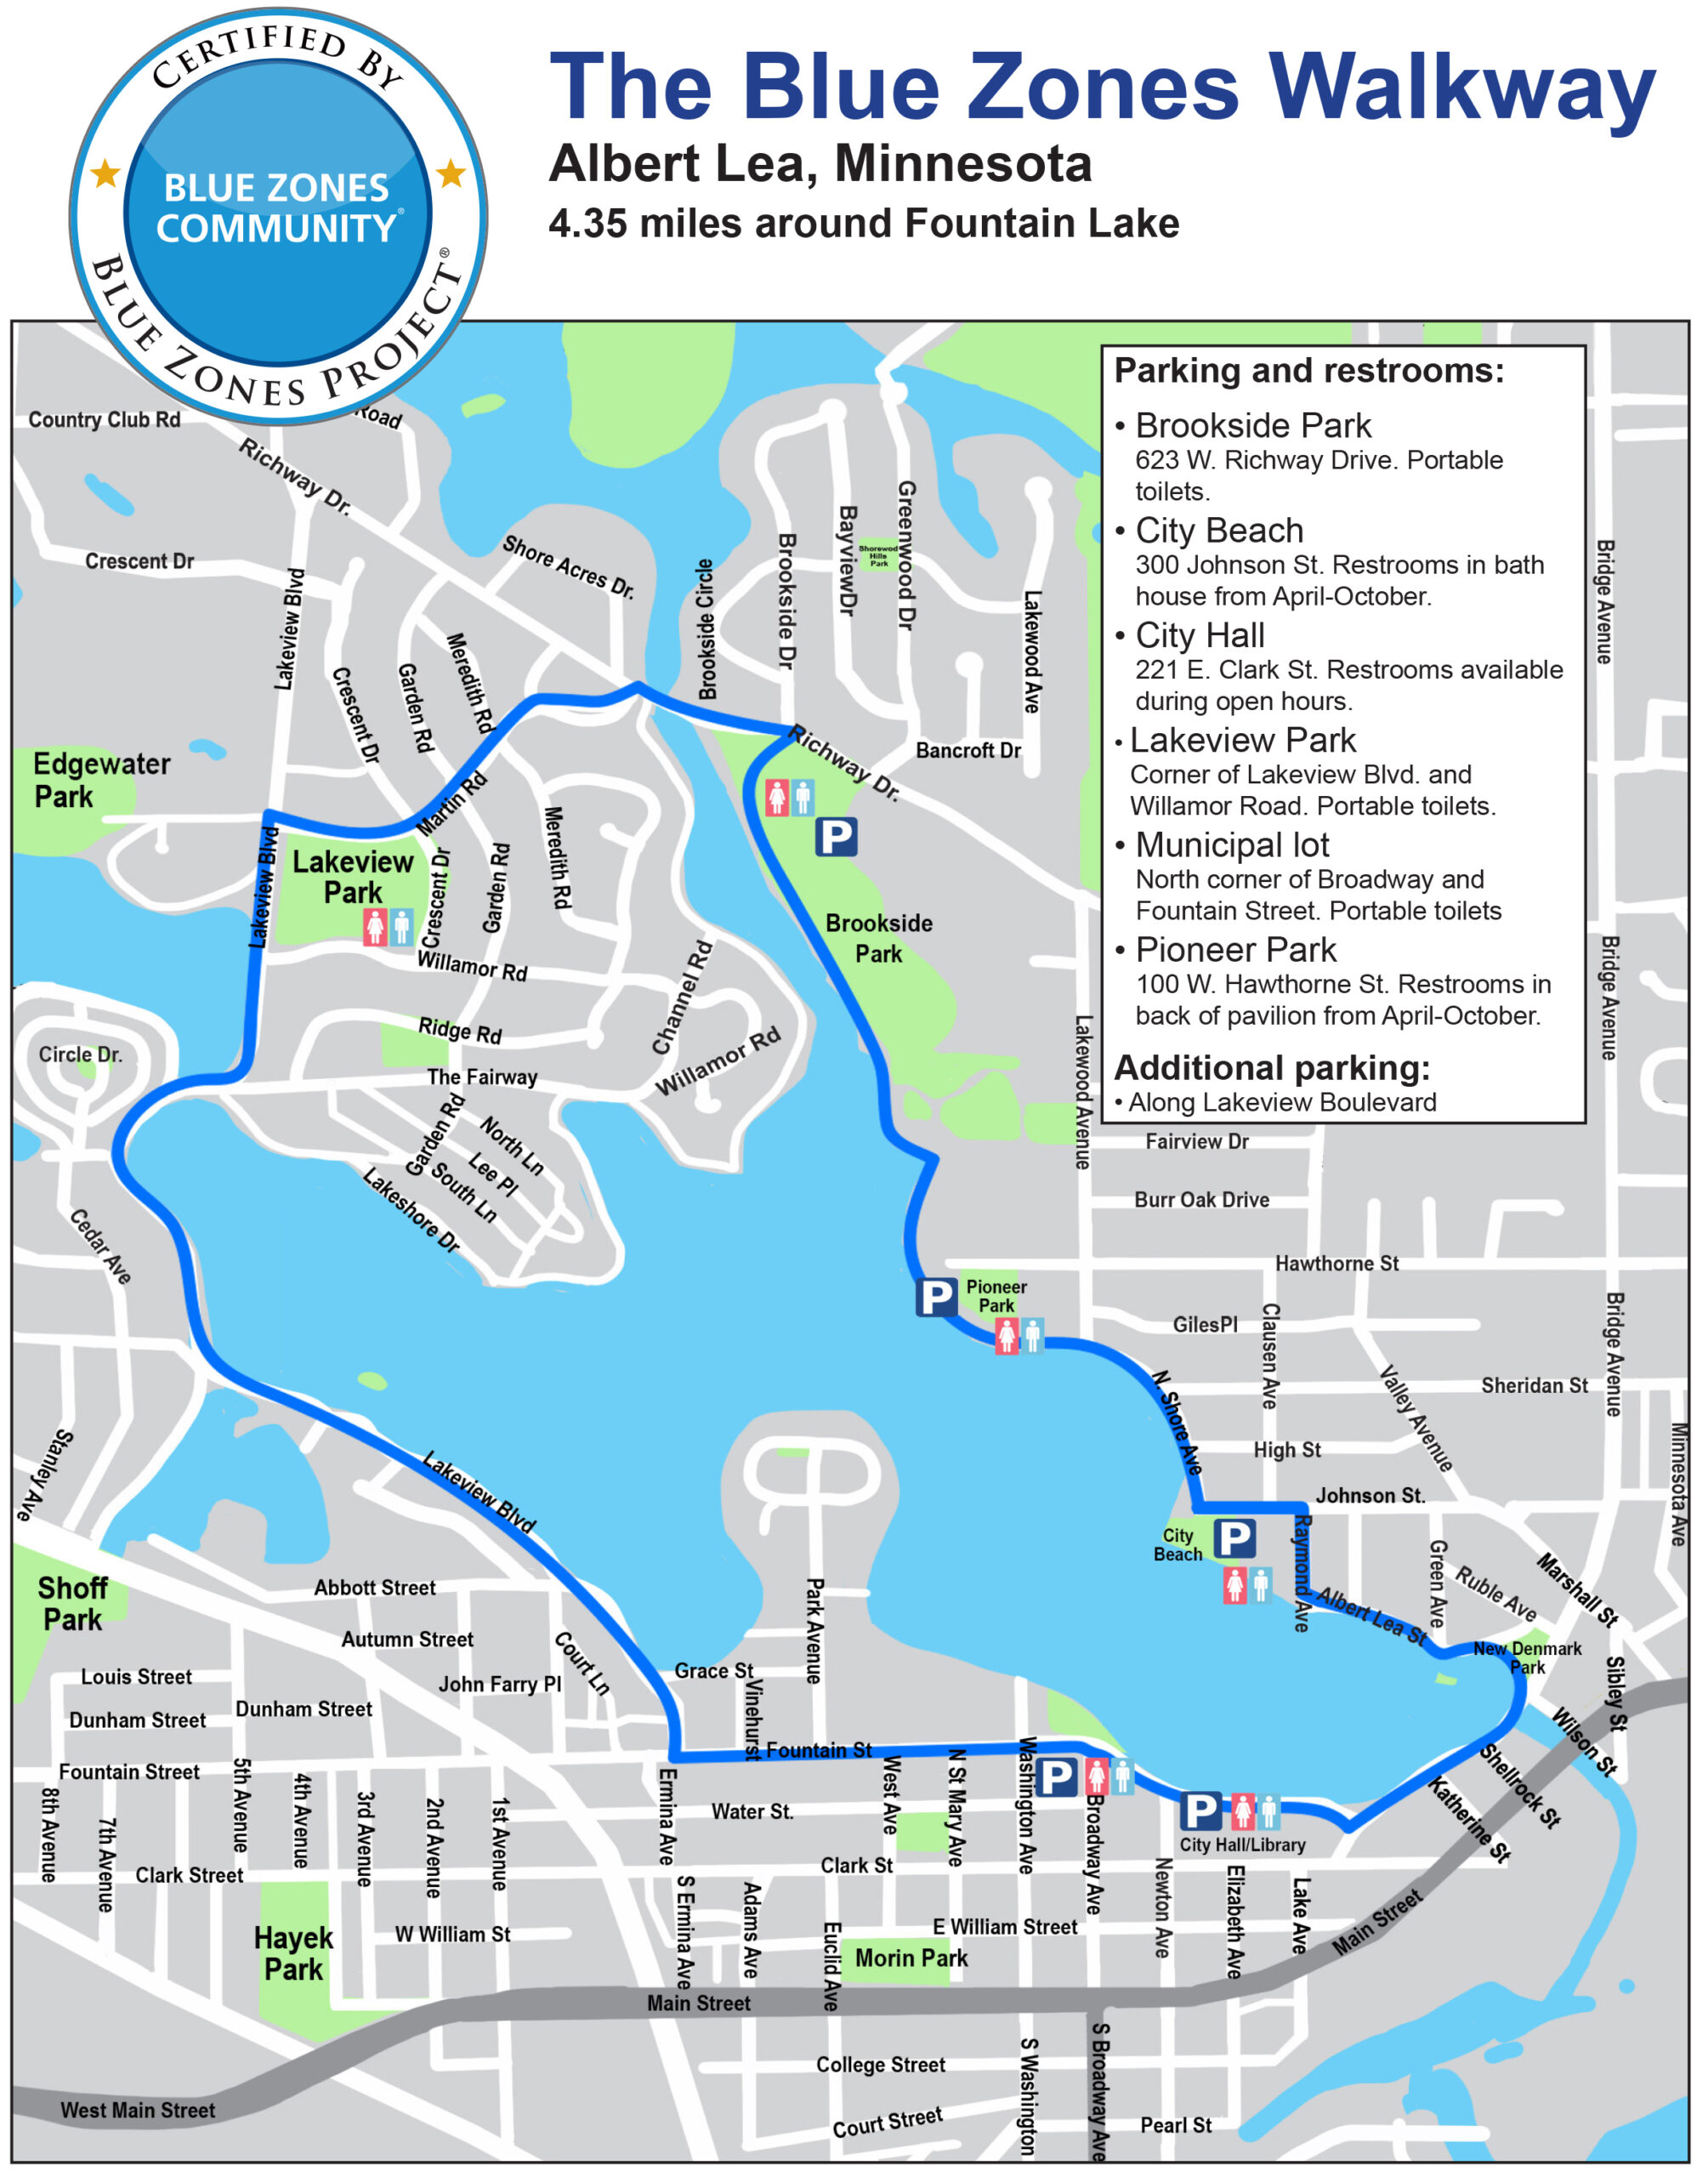 Map of Fountain Lake showing Blue Zones walkway path